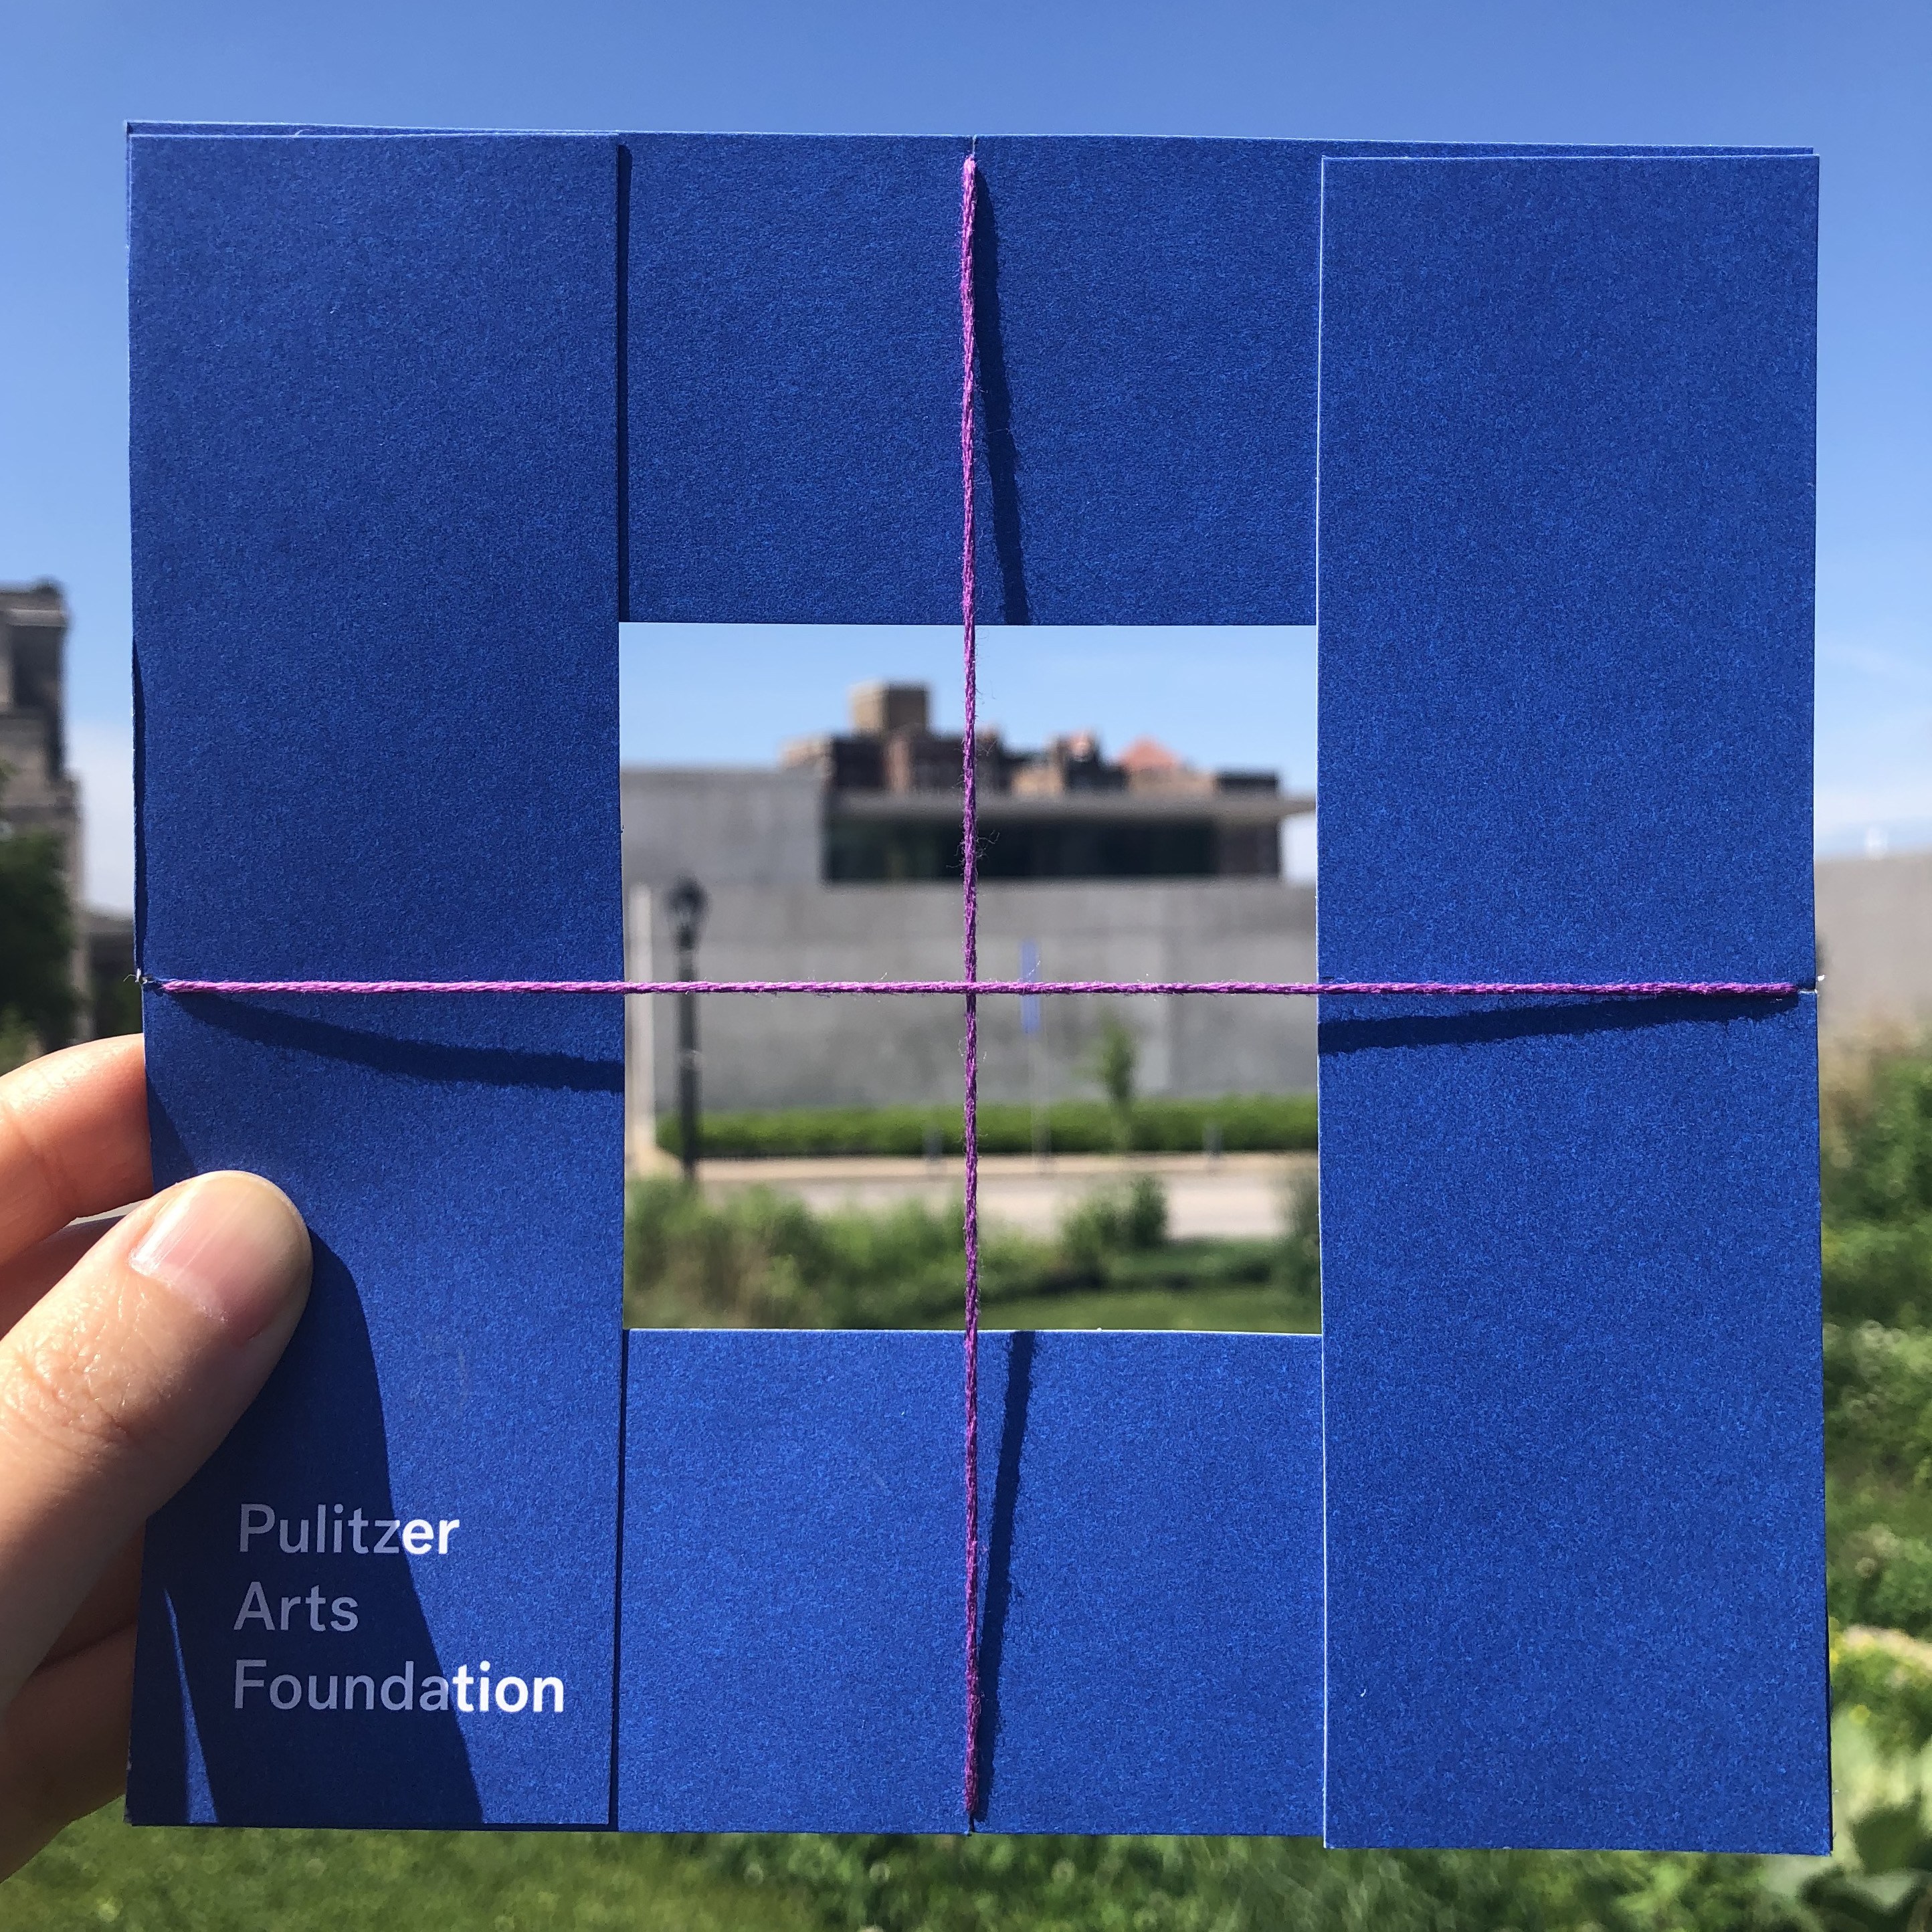 A handmade square viewfinder, made with a blue Pulitzer catalogue and string, framing the Ando building.